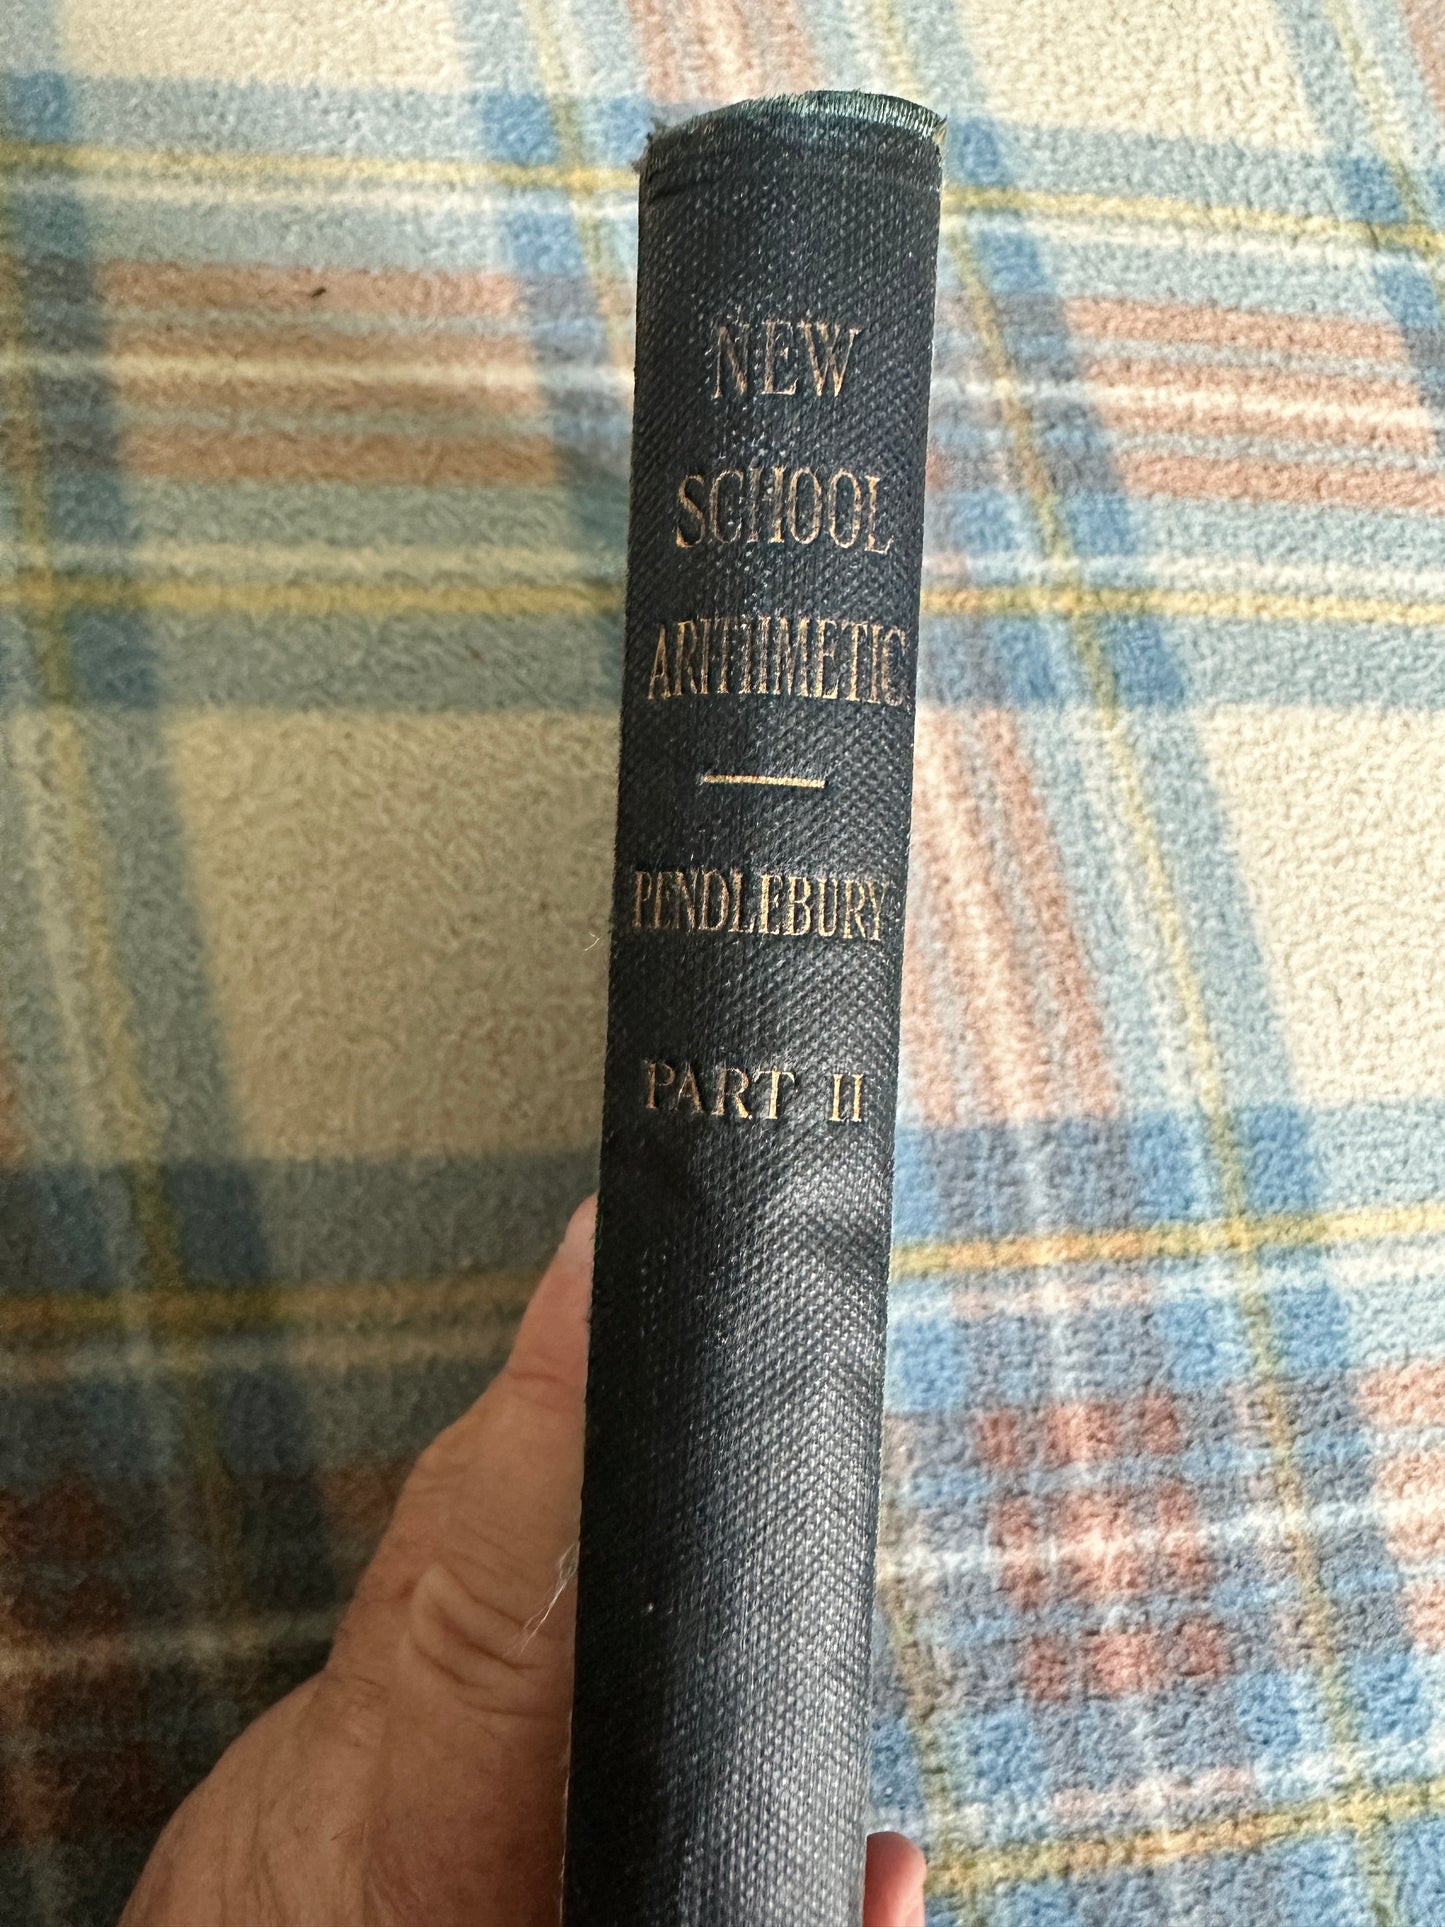 1908 New School Arithmetic (Cambridge Mathematical Series) Charles Pendlebury(Bell & Sons Publisher)